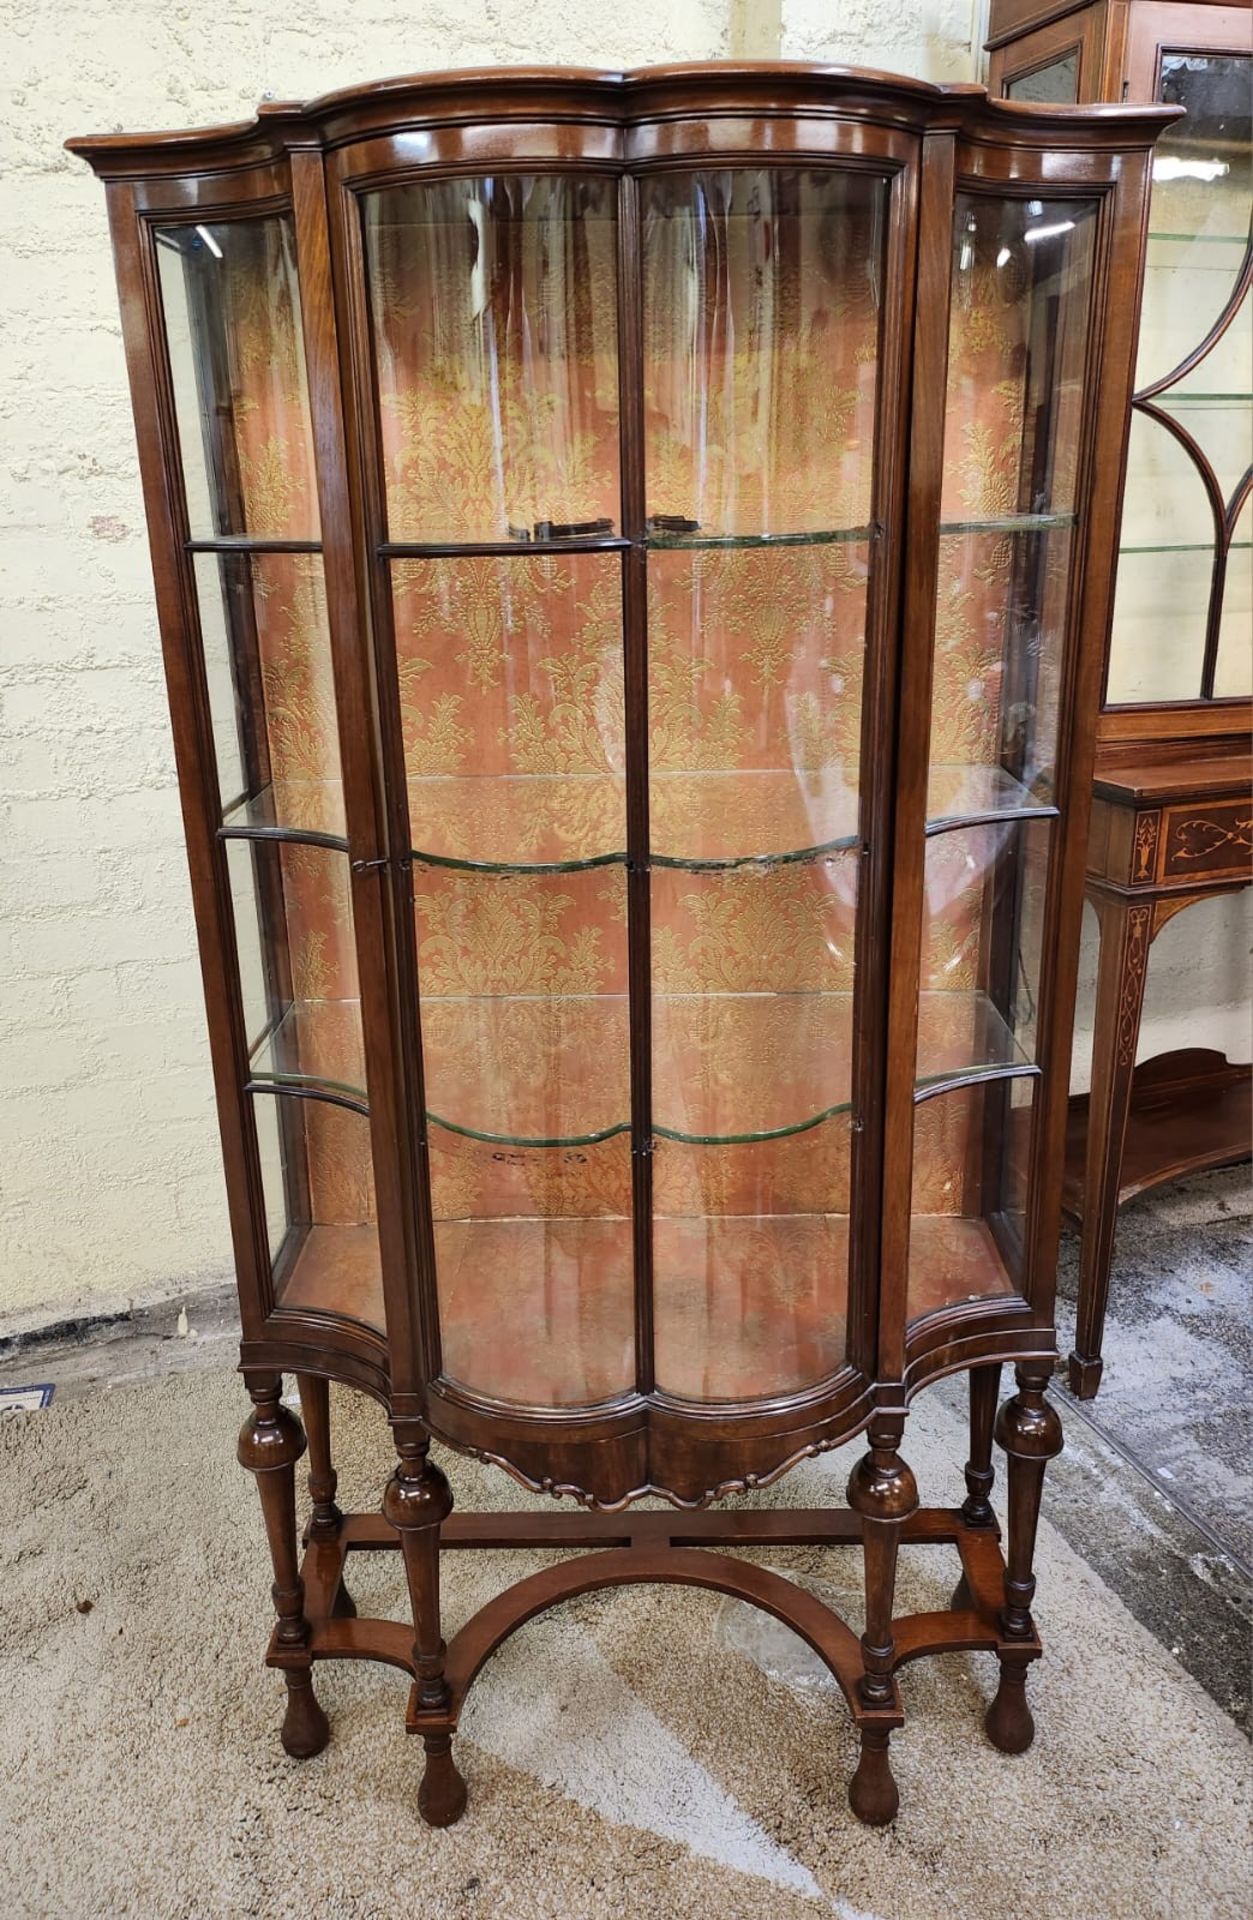 Waring And Gillow A Fine Quality Serpentine Fronted Display Cabinet By The Renowned Cabinet